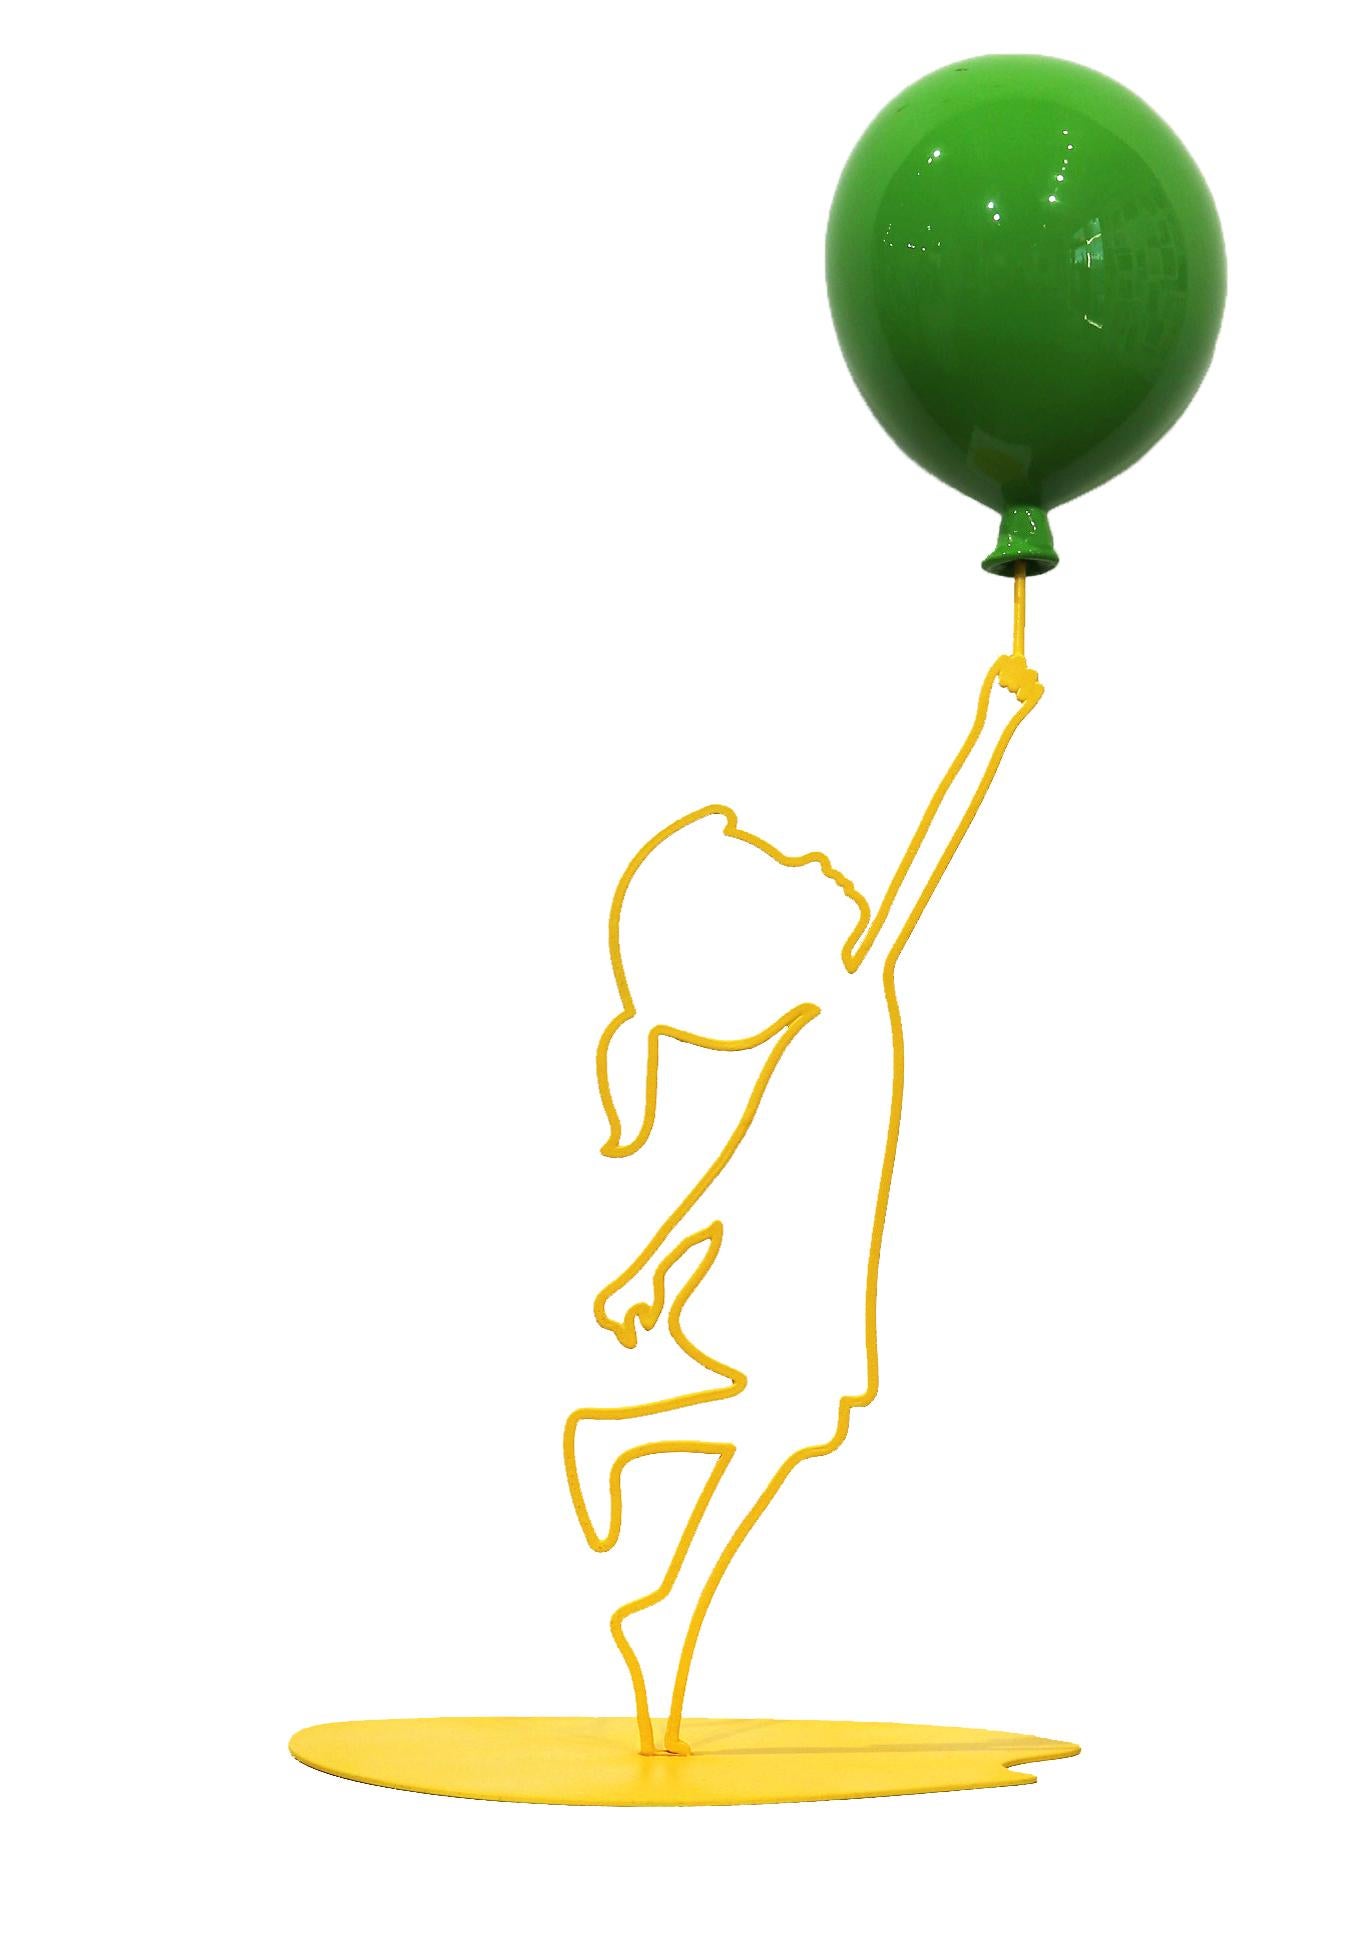 Hopeful (19/35) - Yellow Figurative Sculpture with Glossy Green Balloon